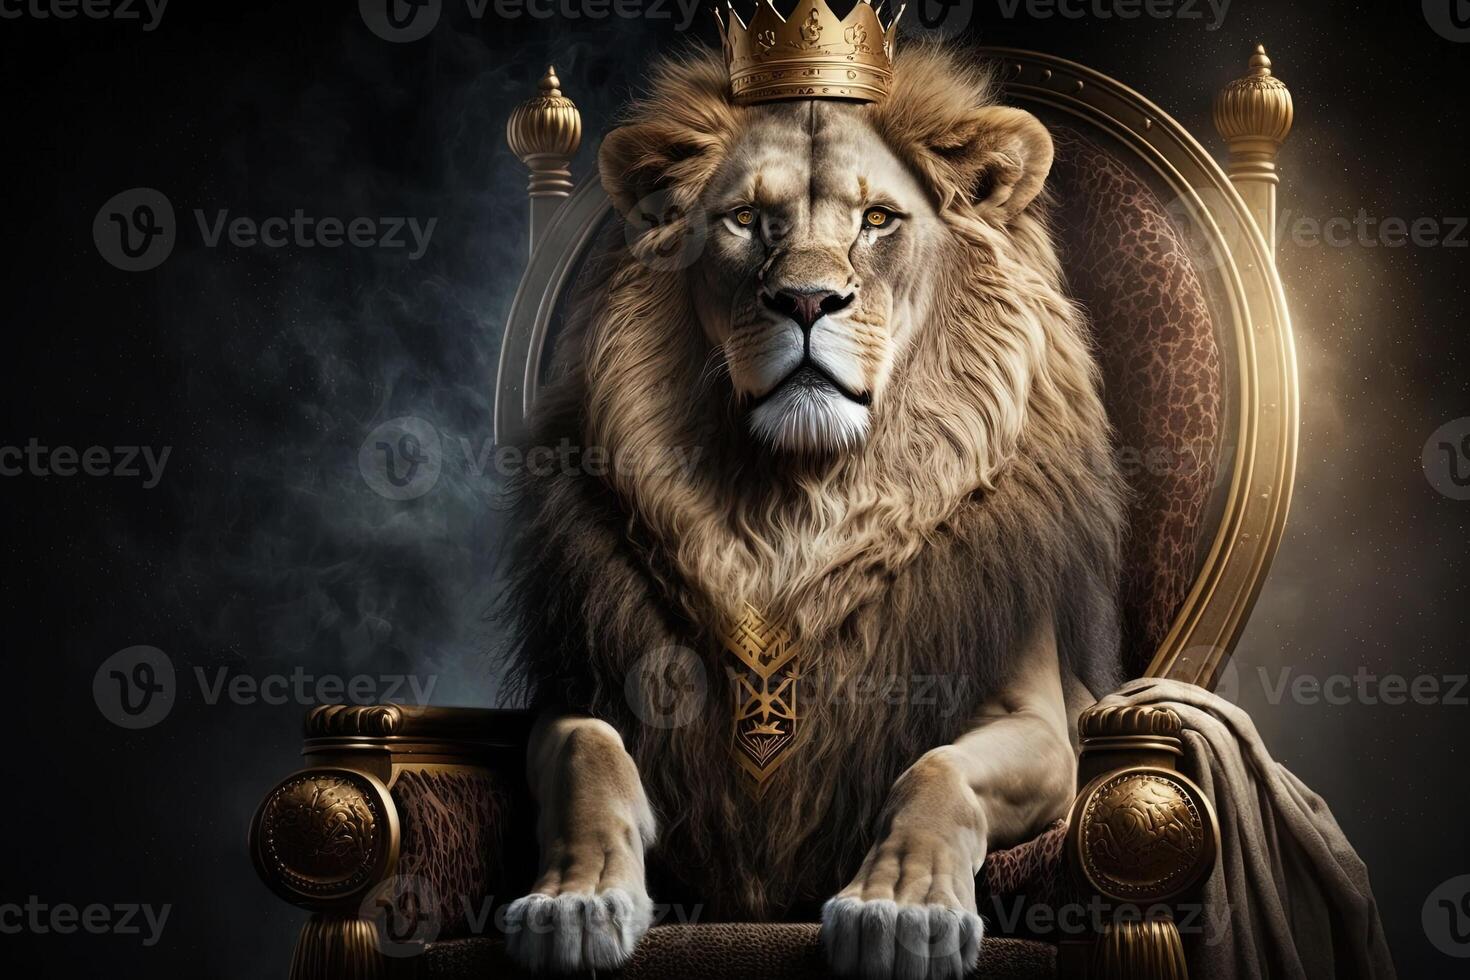 Royal lion wearing a gold crown and red cloak sitting on a golden and red throne. Golden shining king of beasts lion on a royal golden throne. illustration photo